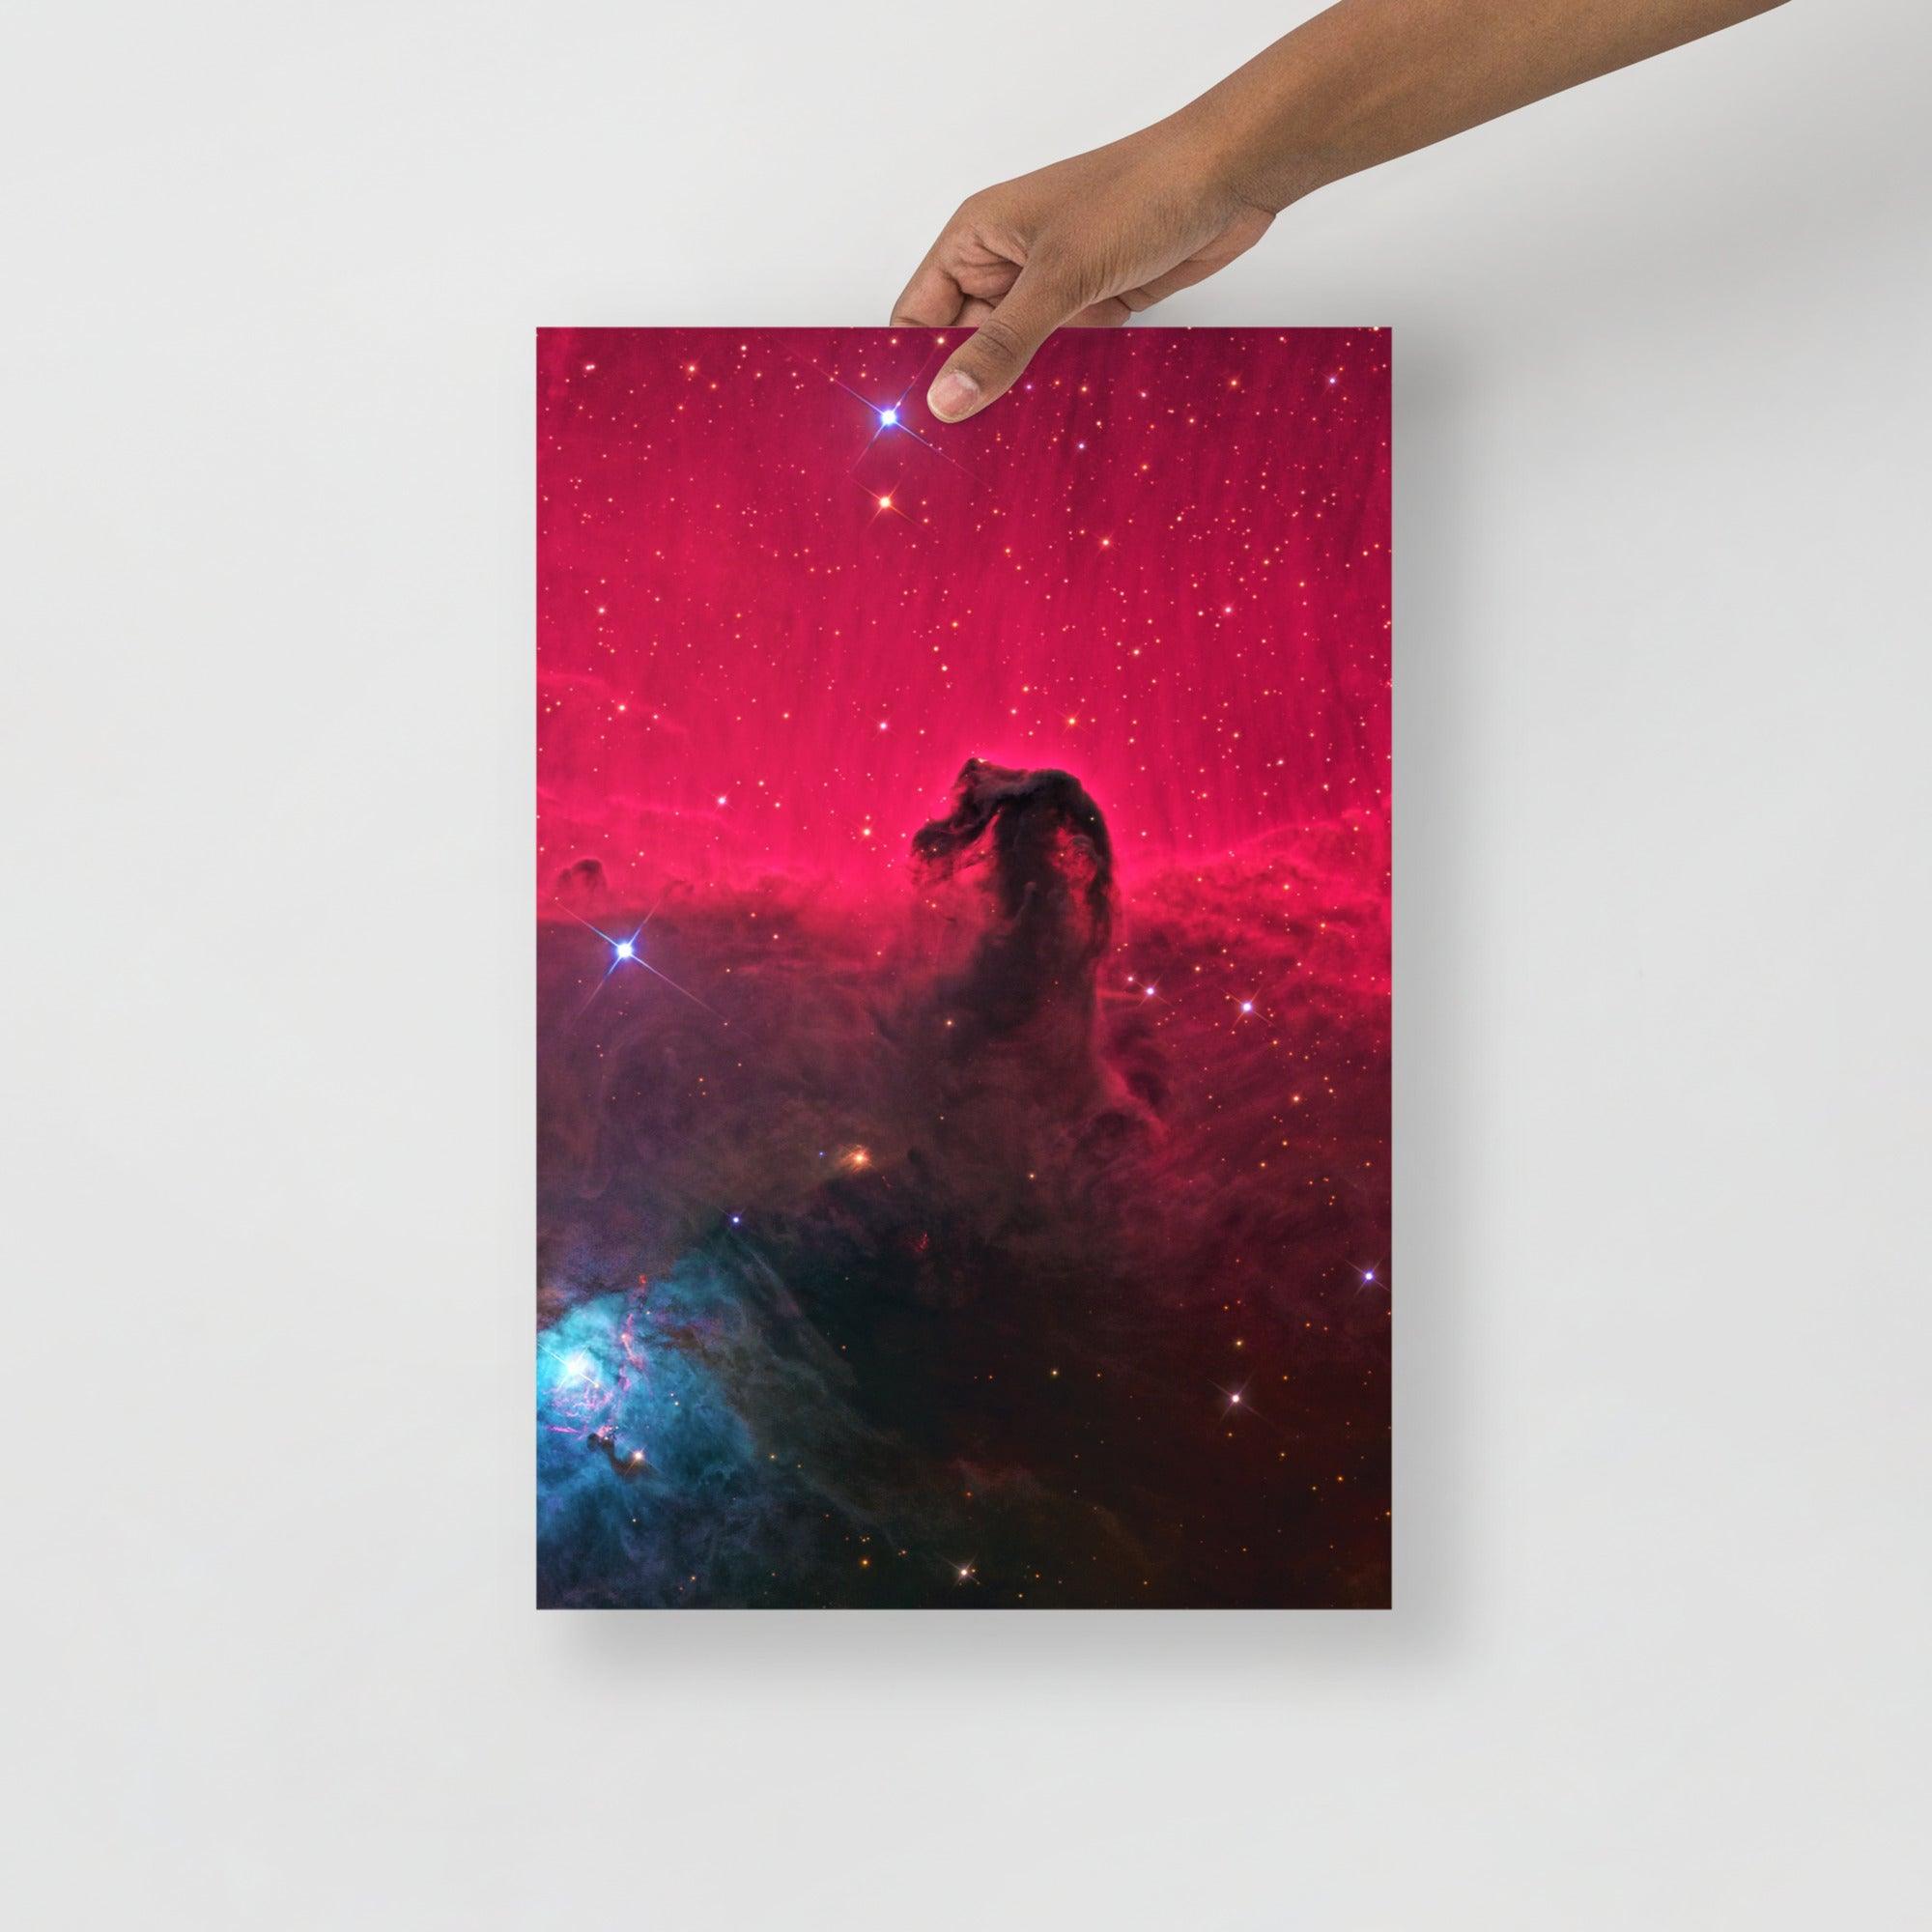 A Horsehead Nebula poster on a plain backdrop in size 12x18”.